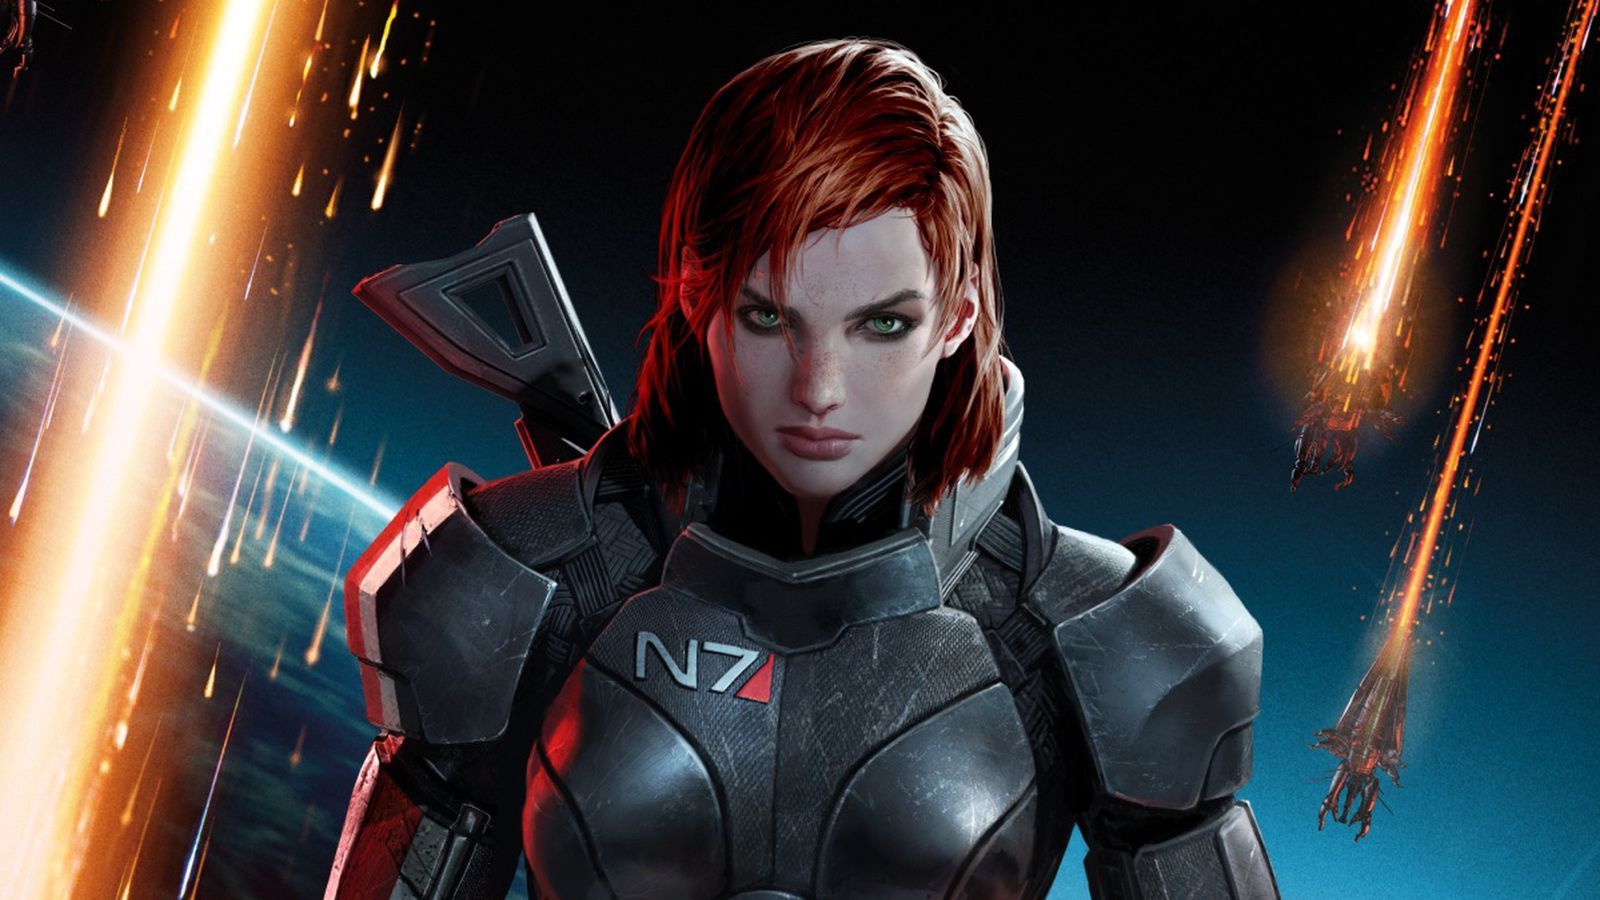 Mass Effect's Commander Shepard was created as a woman